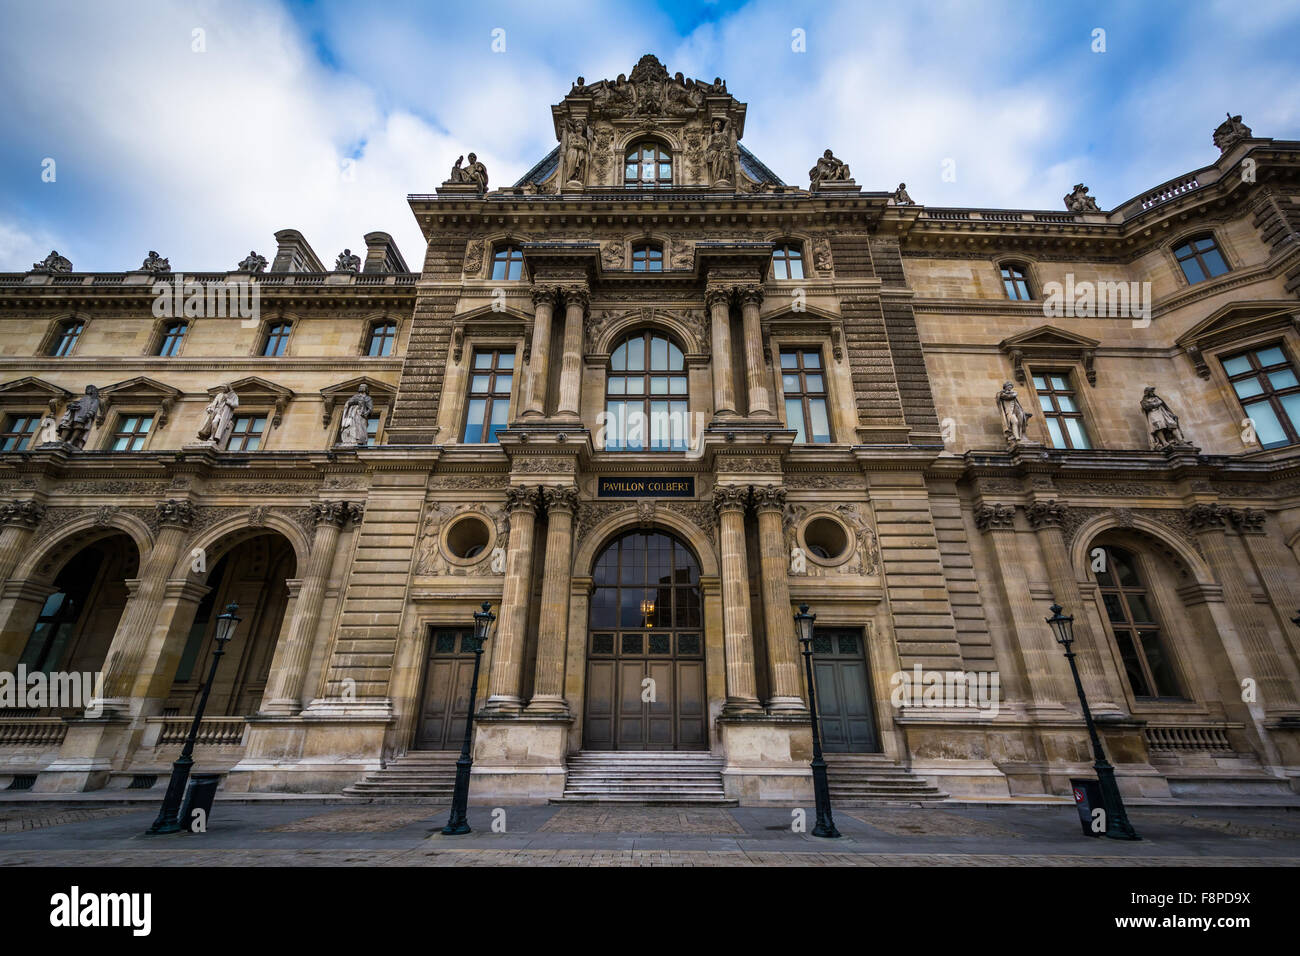 Pavillon Colbert, at the Louvre Palace, in Paris, France. Stock Photo